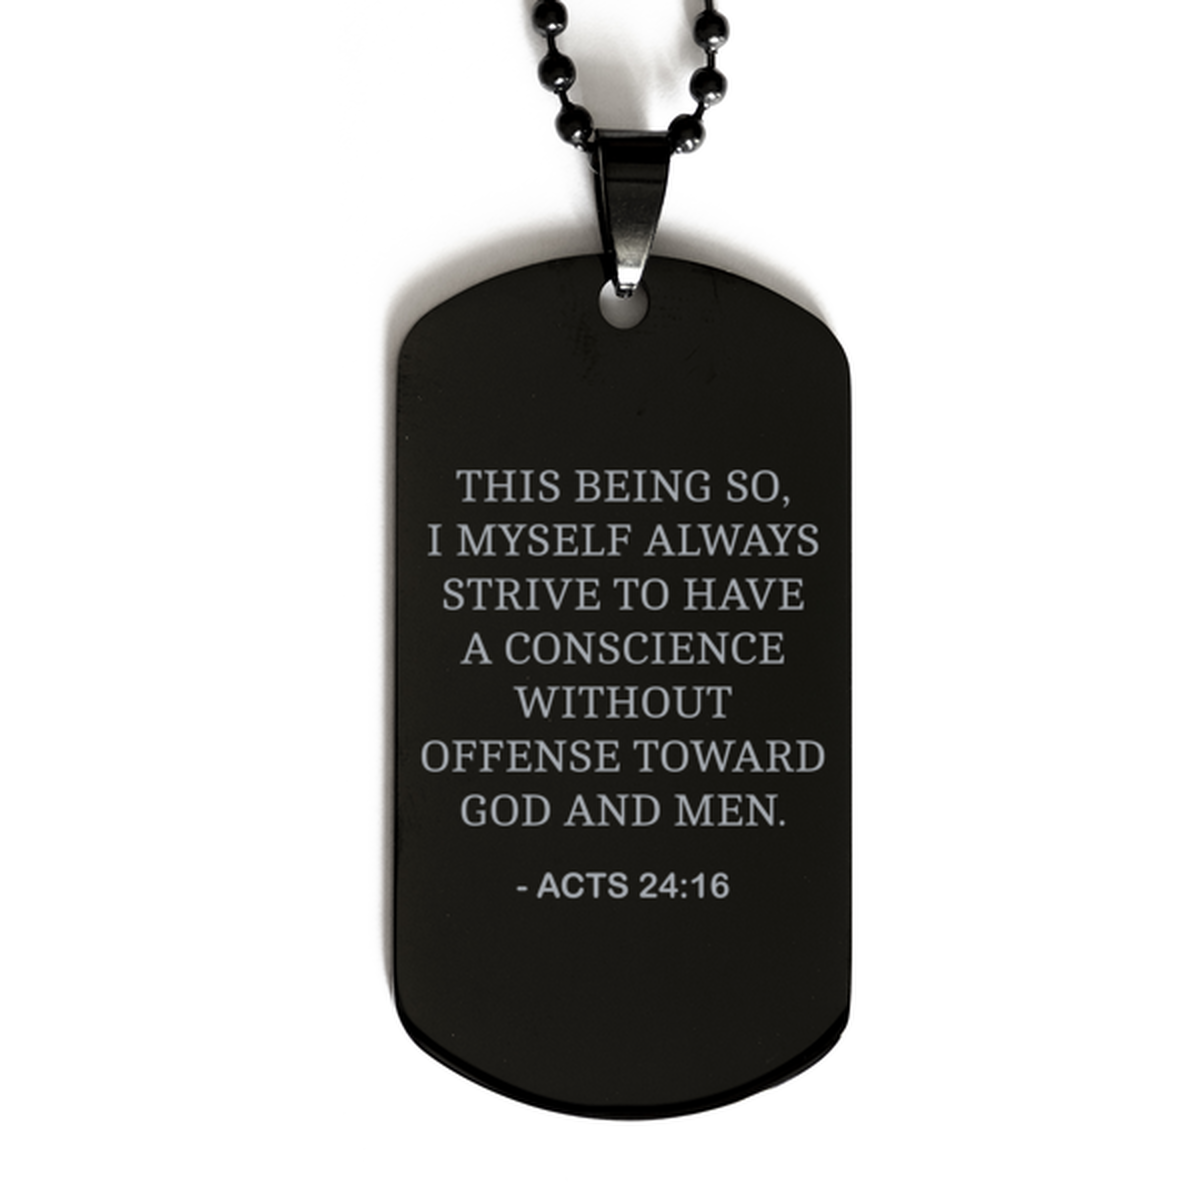 Bible Verse Black Dog Tag, Acts 24:16 This Being So, I Myself Always Strive To Have A, Christian Inspirational Necklace Gifts For Men Women